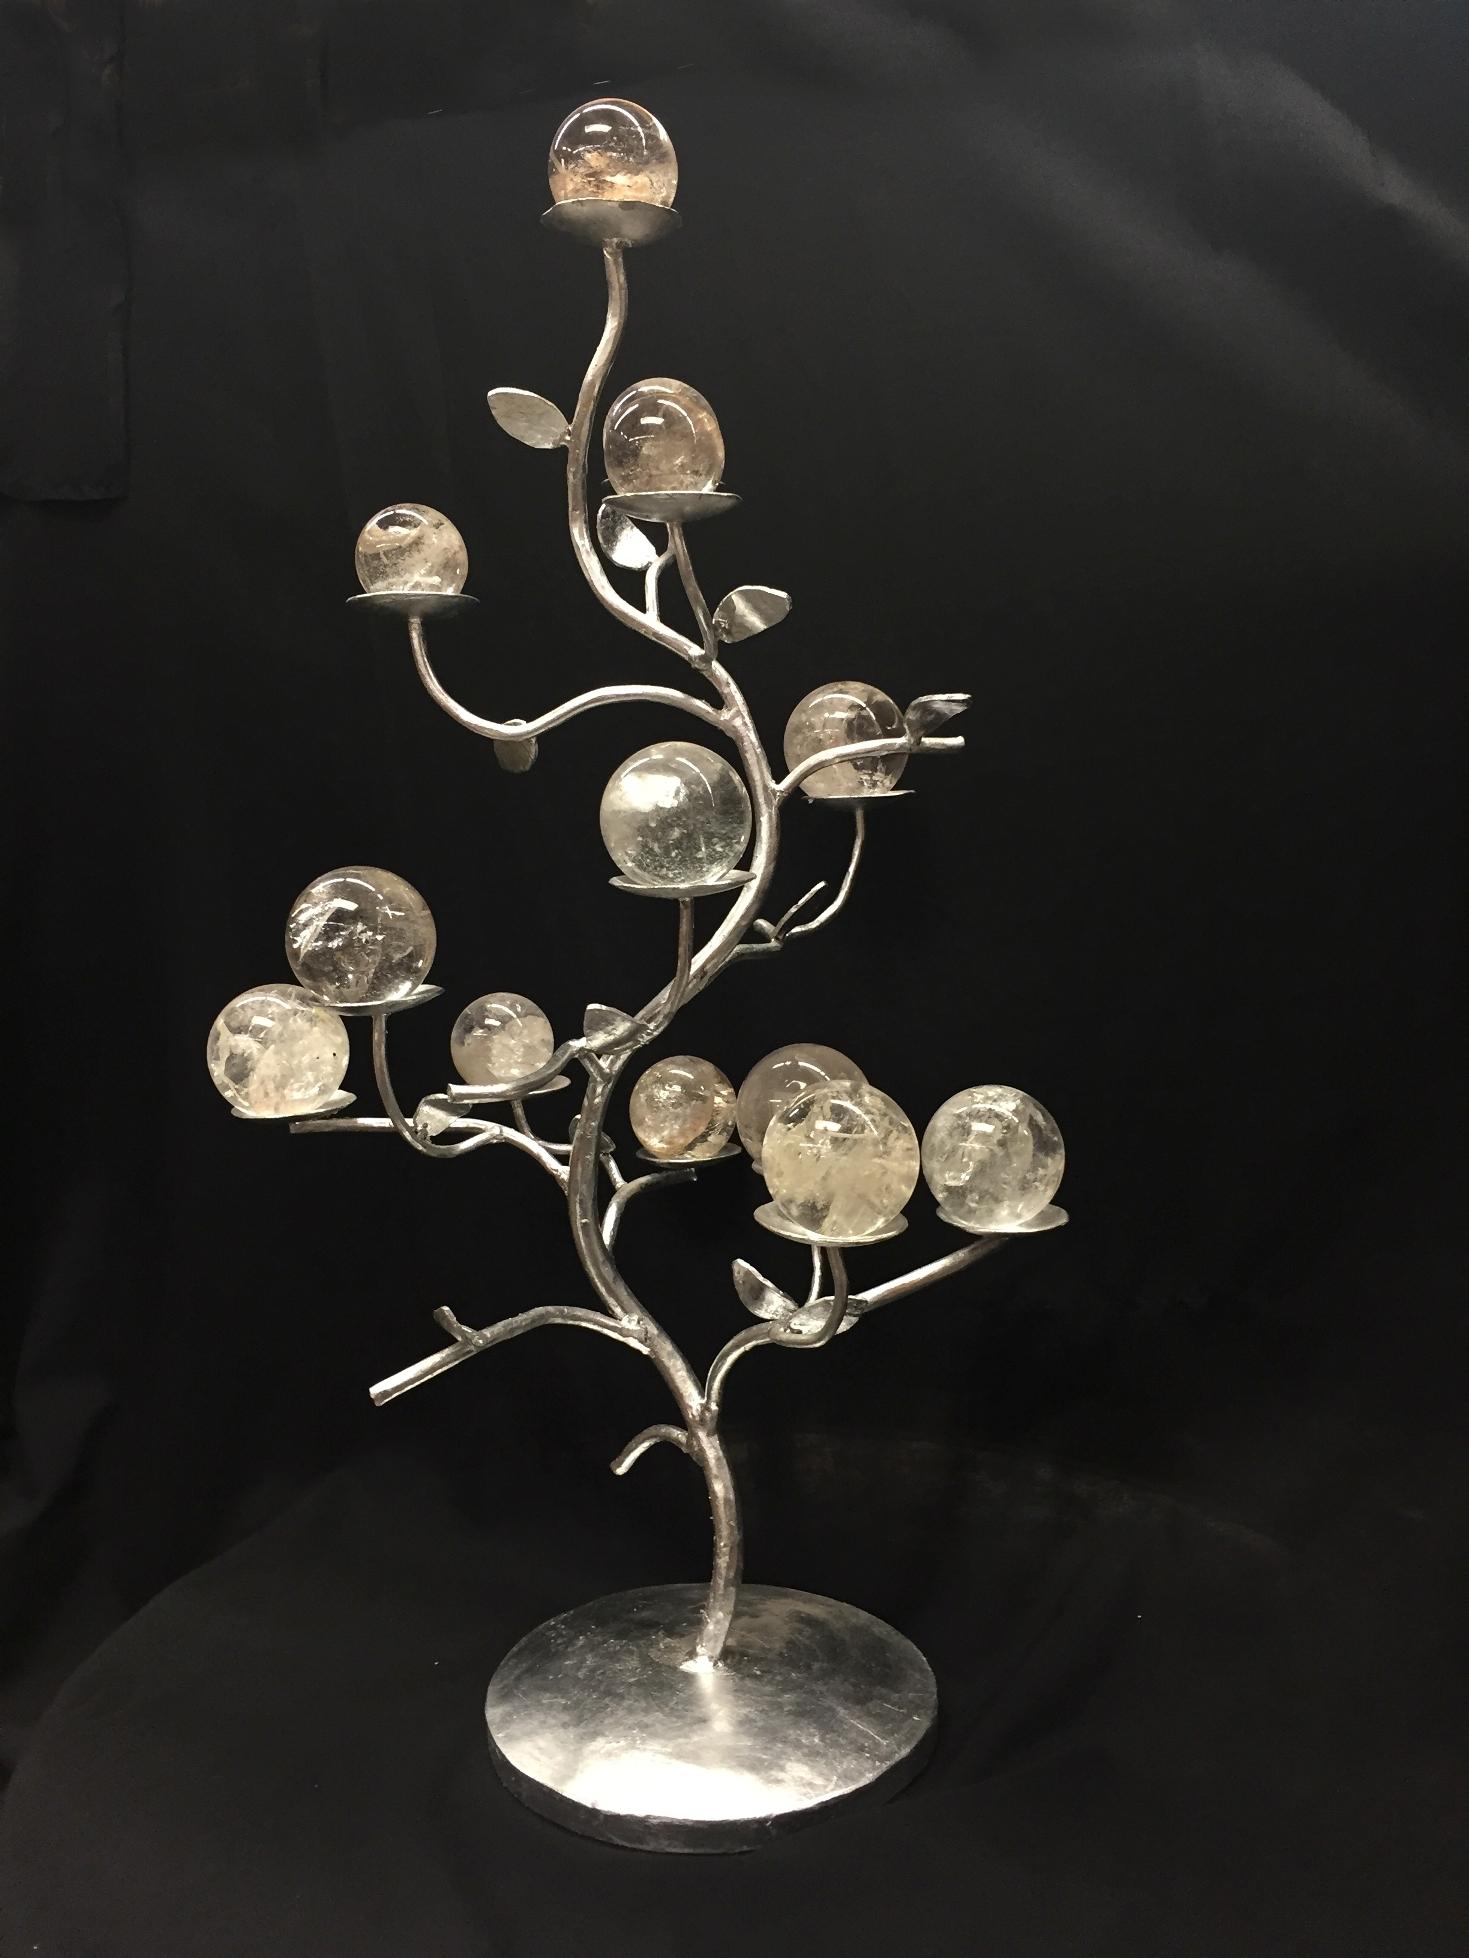 A unique modern style hand-forged wrought iron tree form centerpiece with 12 hand-polished rock crystal spheres in various sizes.
Each rock crystal sphere are resting on individual small saucers throughout the centerpiece.
The finish is imitation